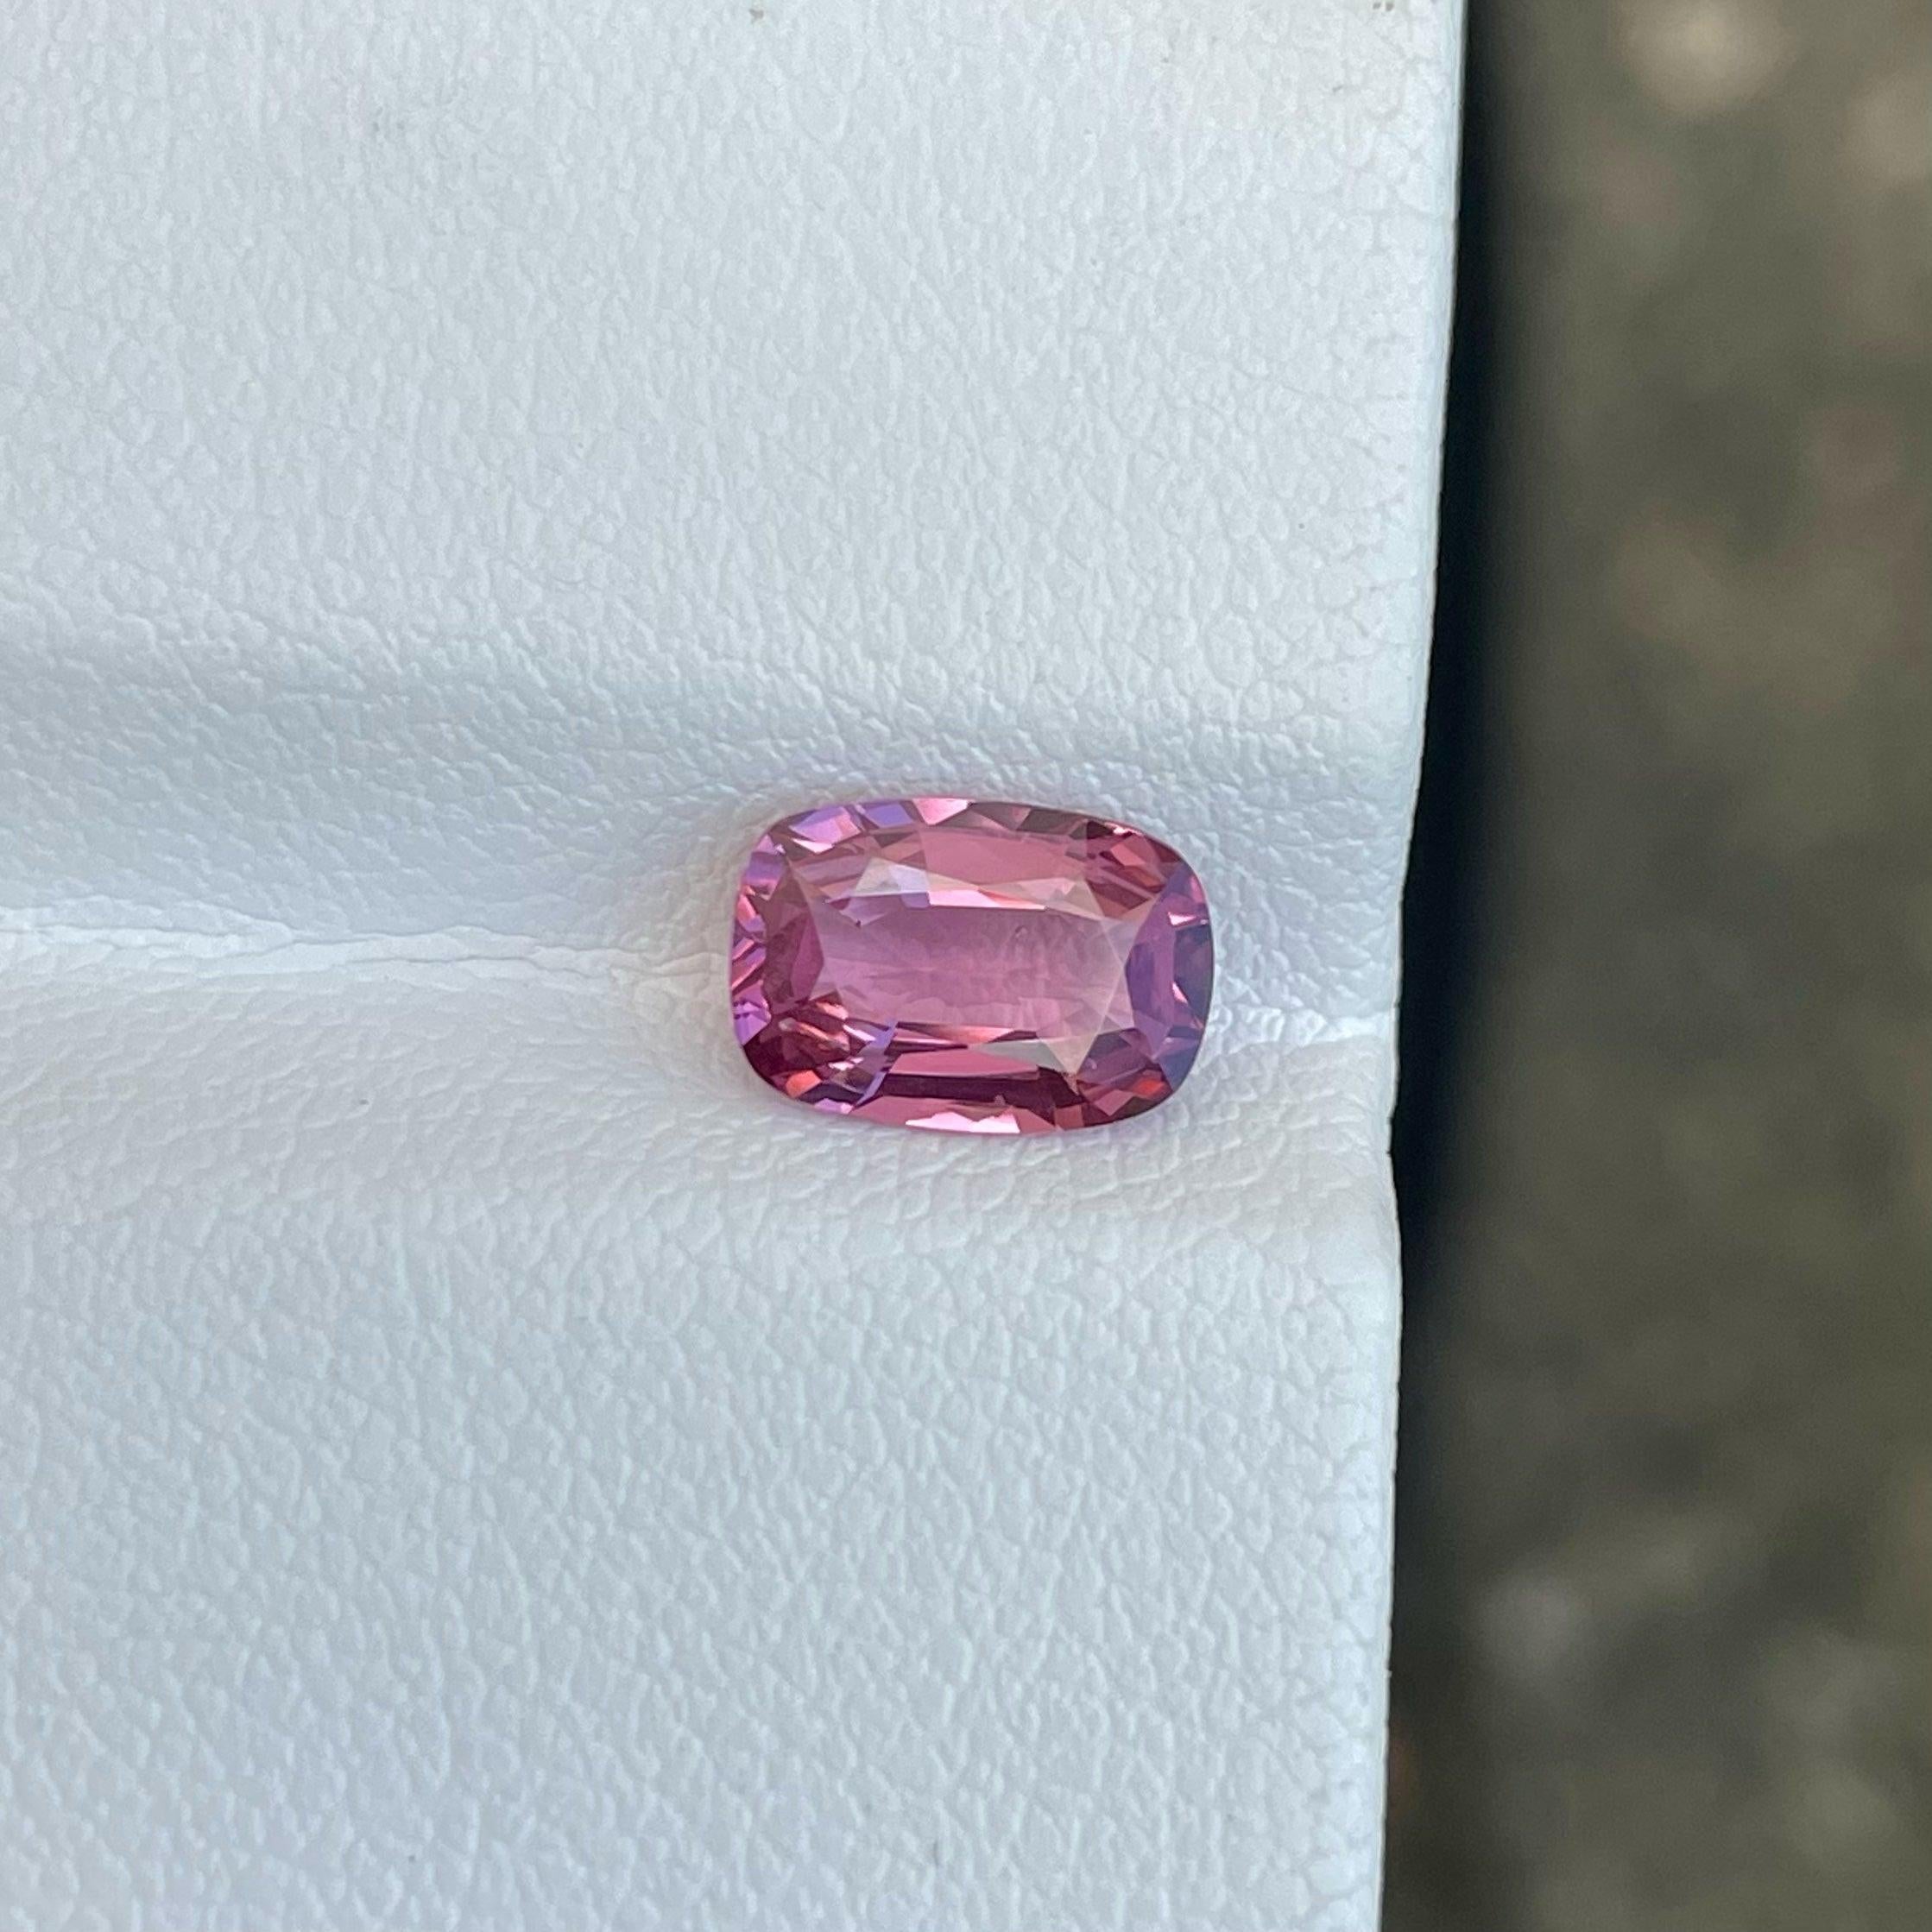 Sweet Pink Spinel From Burma of 1.50 carats from Burma has a wonderful cut in a Cushion shape, incredible Pink color. Great brilliance. This gem is VSS Clarity.

Product Information:
GEMSTONE TYPE:	Sweet Pink Spinel From Burma
WEIGHT:	1.50